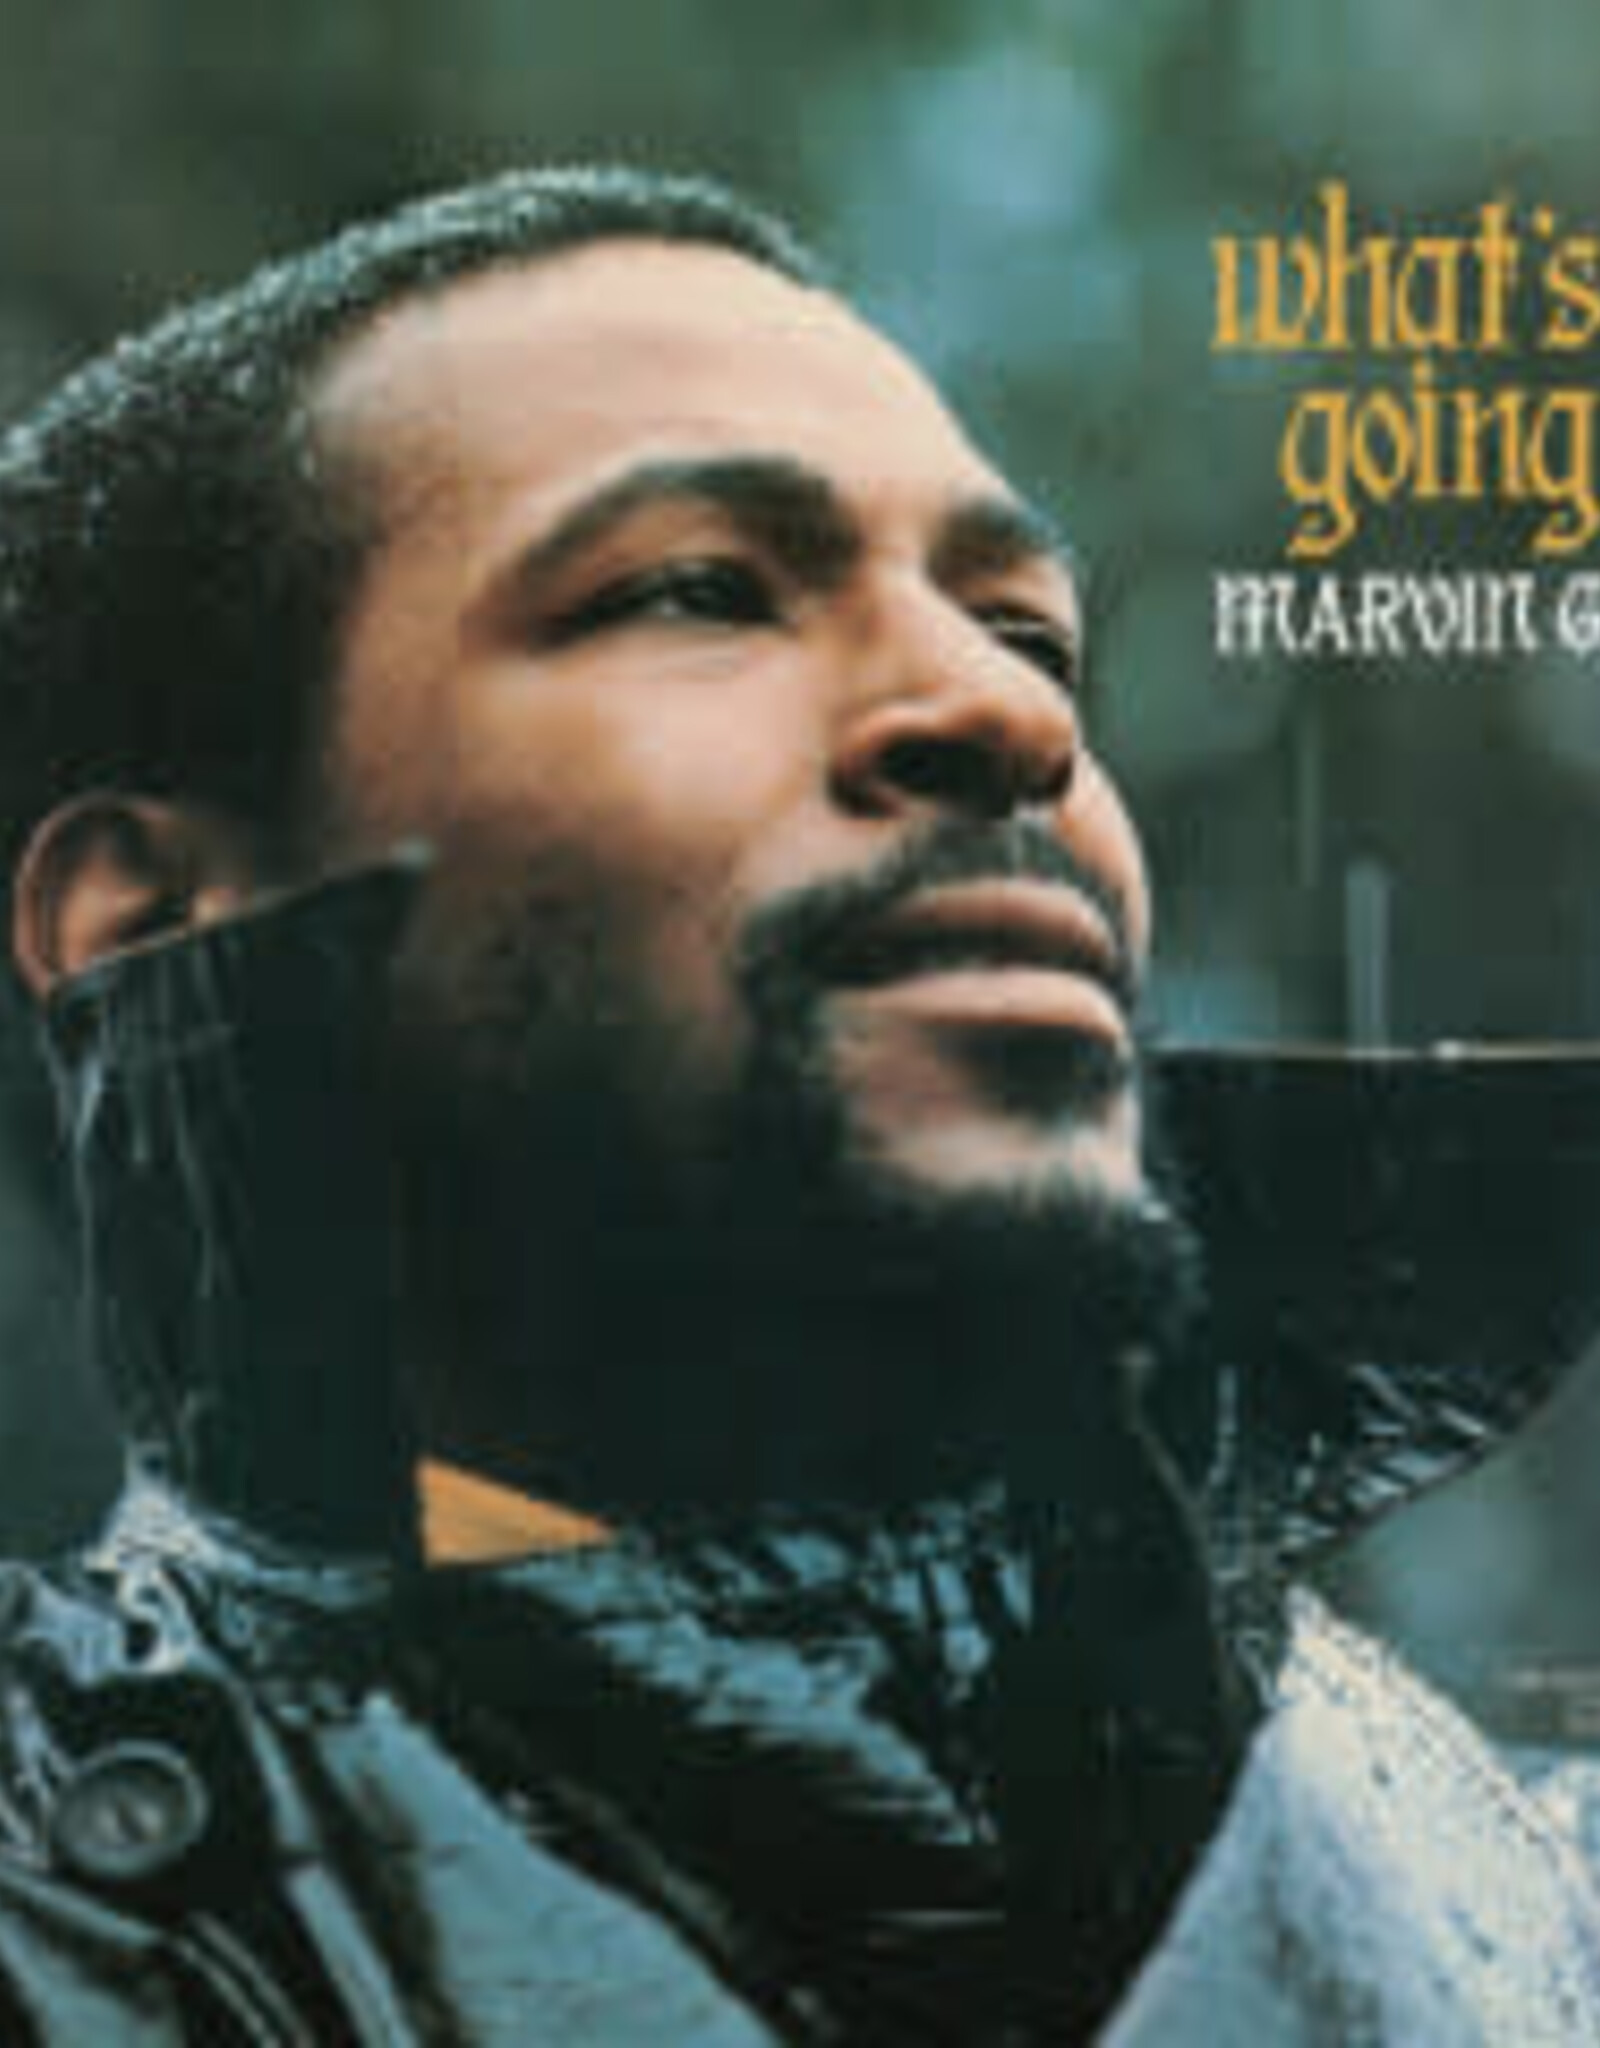 Marvin Gaye - What's Goin' On